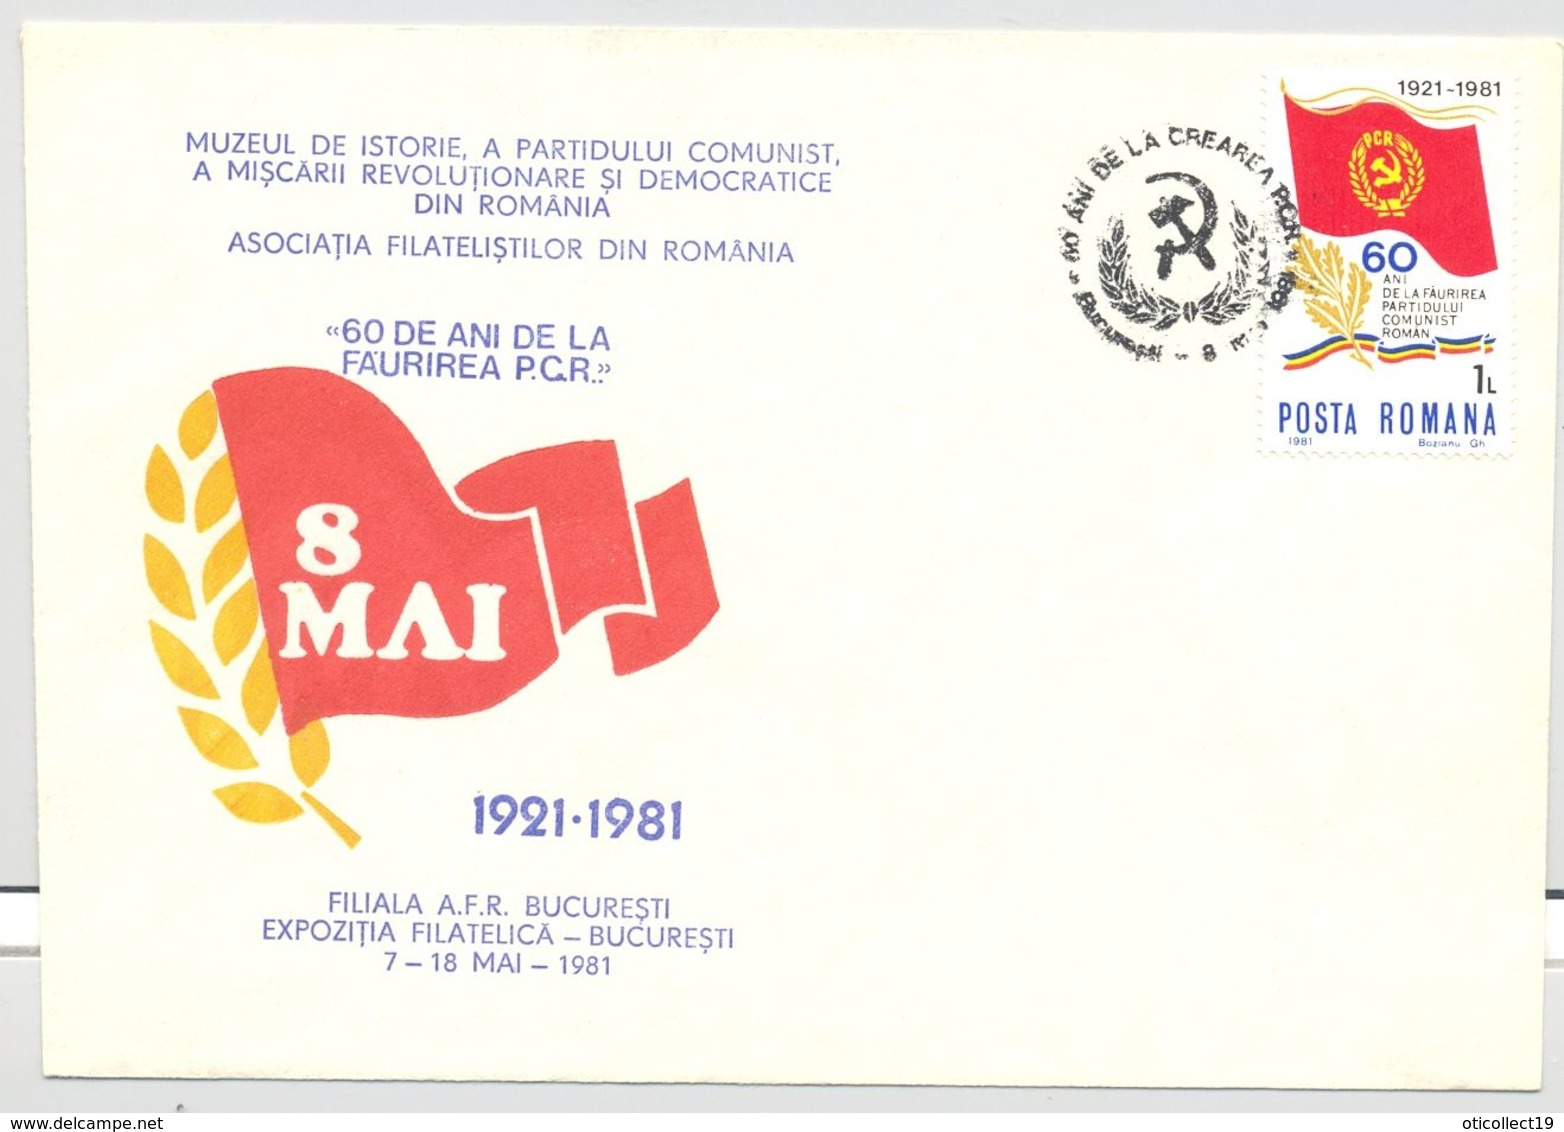 ROMANIAN COMMUNIST PARTY ANNIVERSARY, SPECIAL COVER, 1981, ROMANIA - Covers & Documents